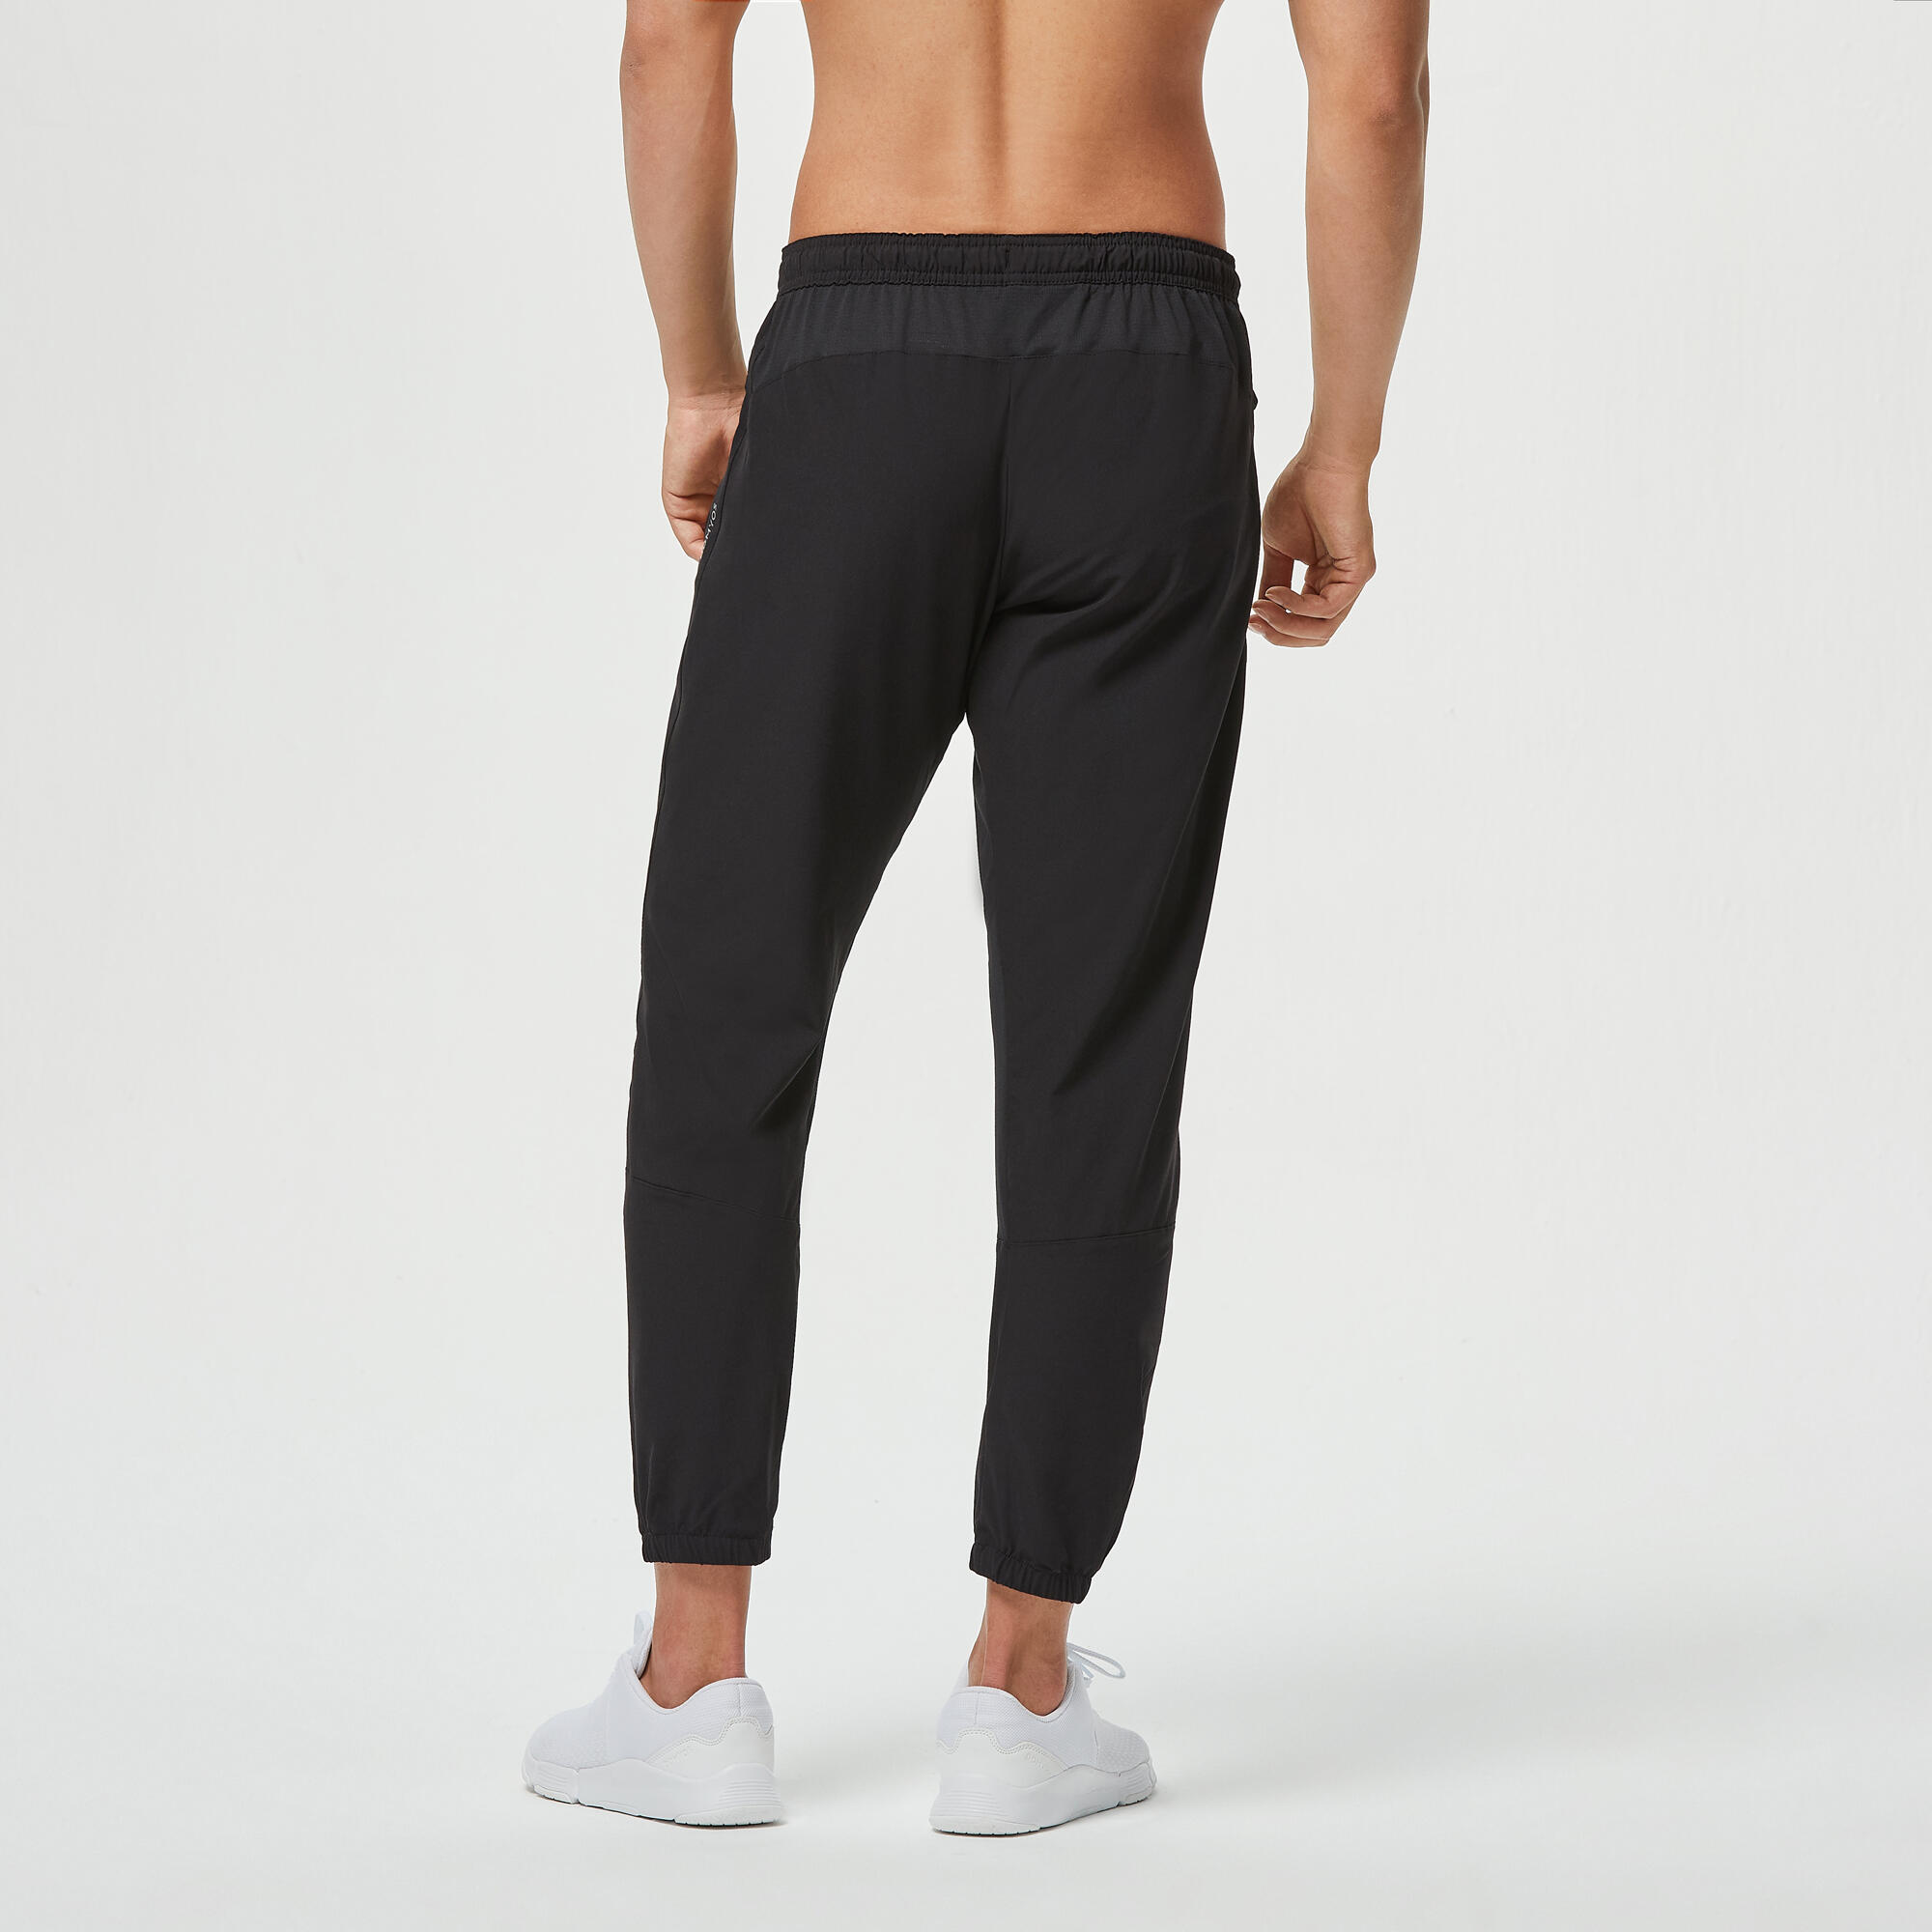 Track Pants for Men | Looking for bottoms🤸🏼‍♀️🏋🏼‍♀️ to work out in once  in a while, or for everyday wear? This model is just for you. Excellent  value for money!. Want to